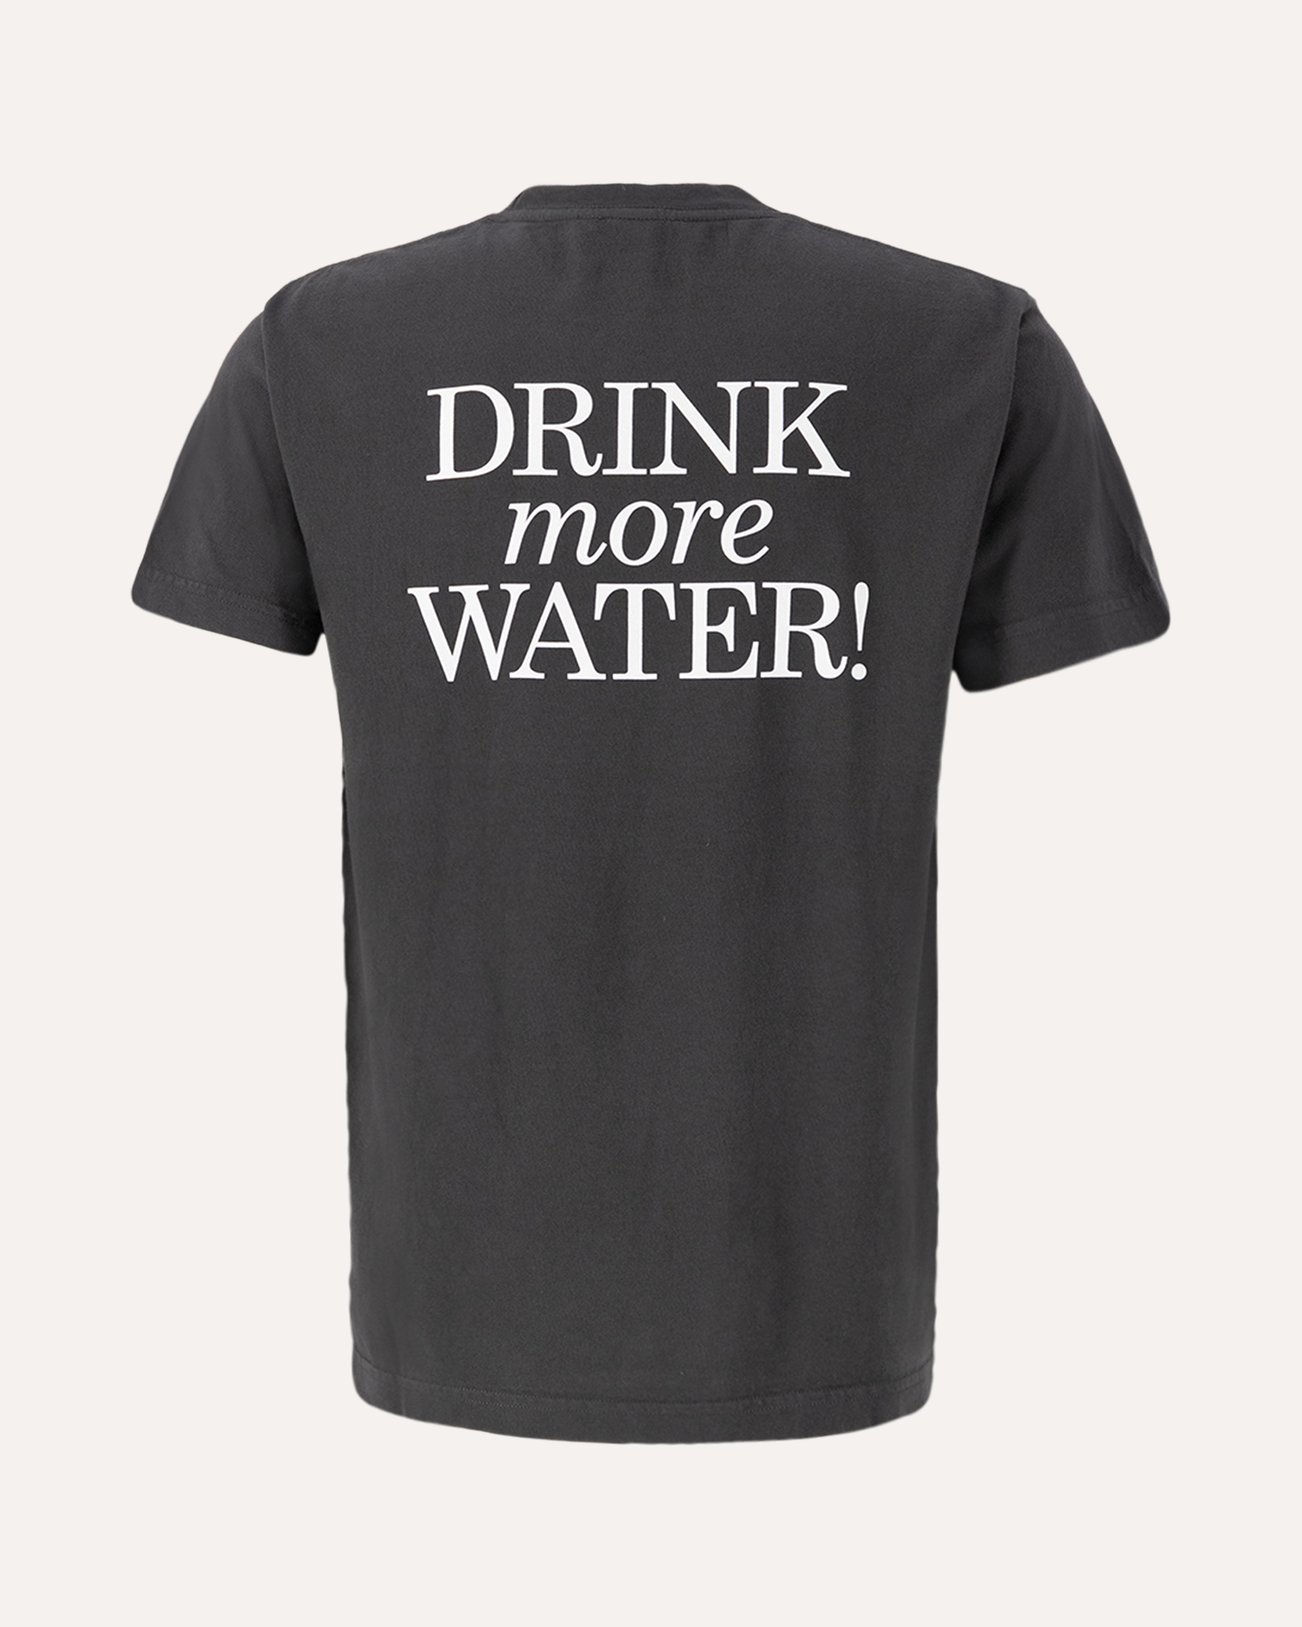 New Drink More Water T Shirt